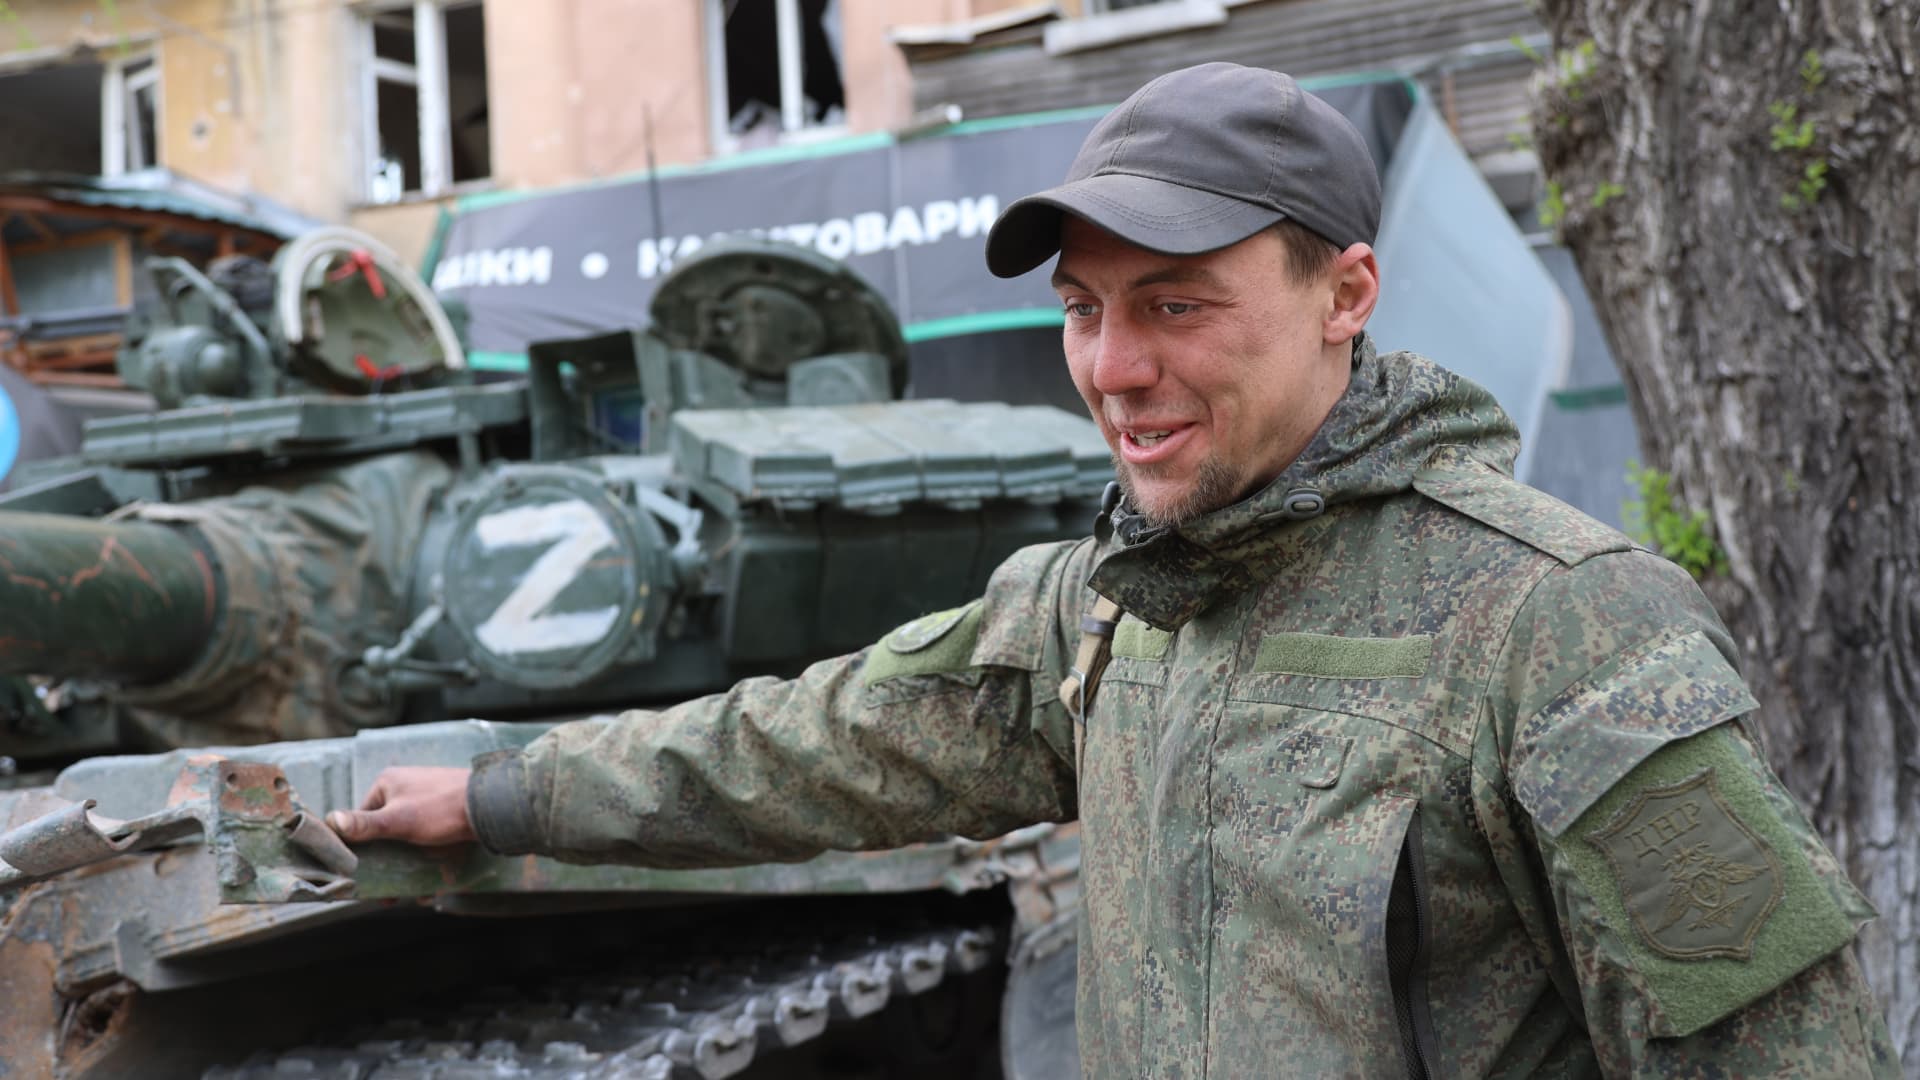 A DPR army fighter is seen in front of the tank as Russian attacks continue in Mariupol, Ukraine on May 04, 2022.